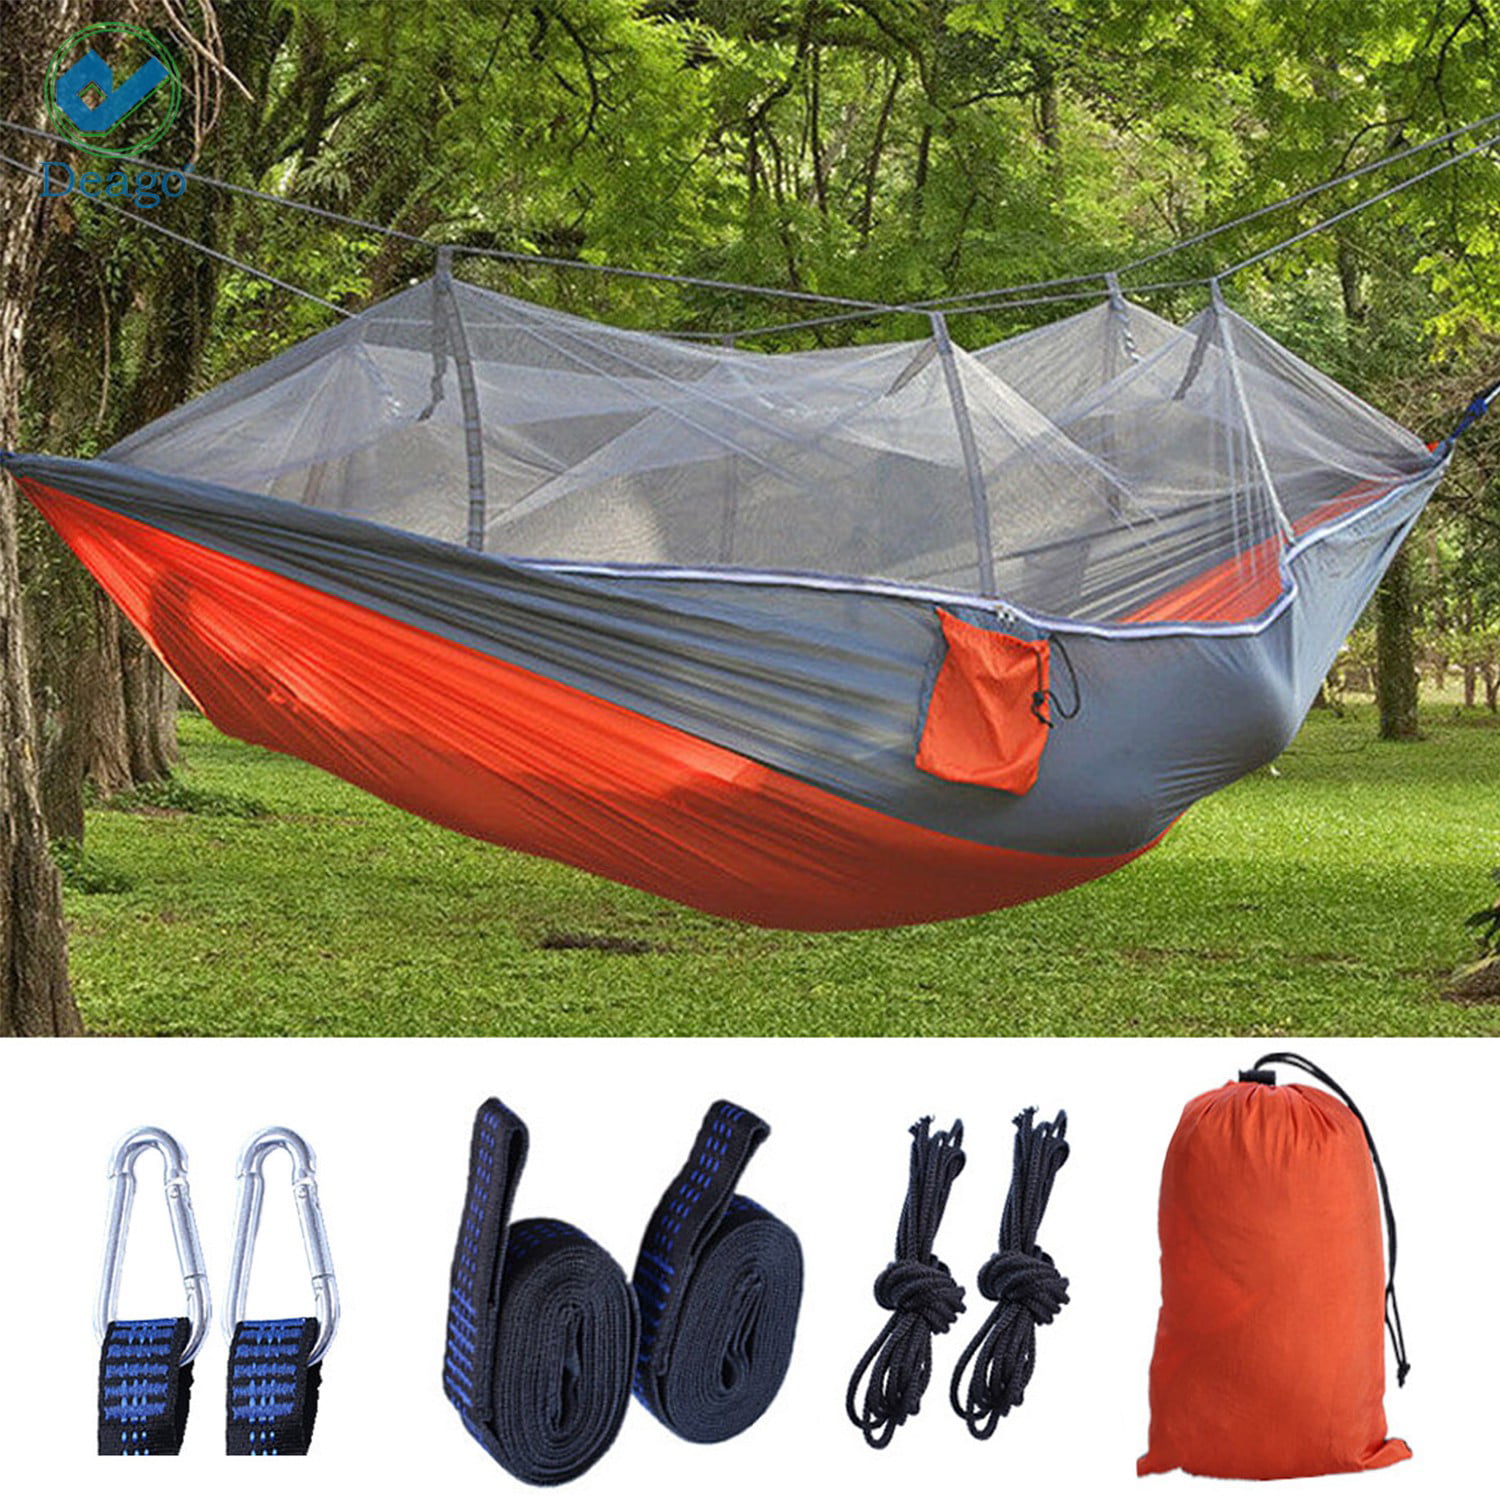 Portable Nylon Hammock Tent With Mosquito Net Double Outdoor Camping Travel Hike 